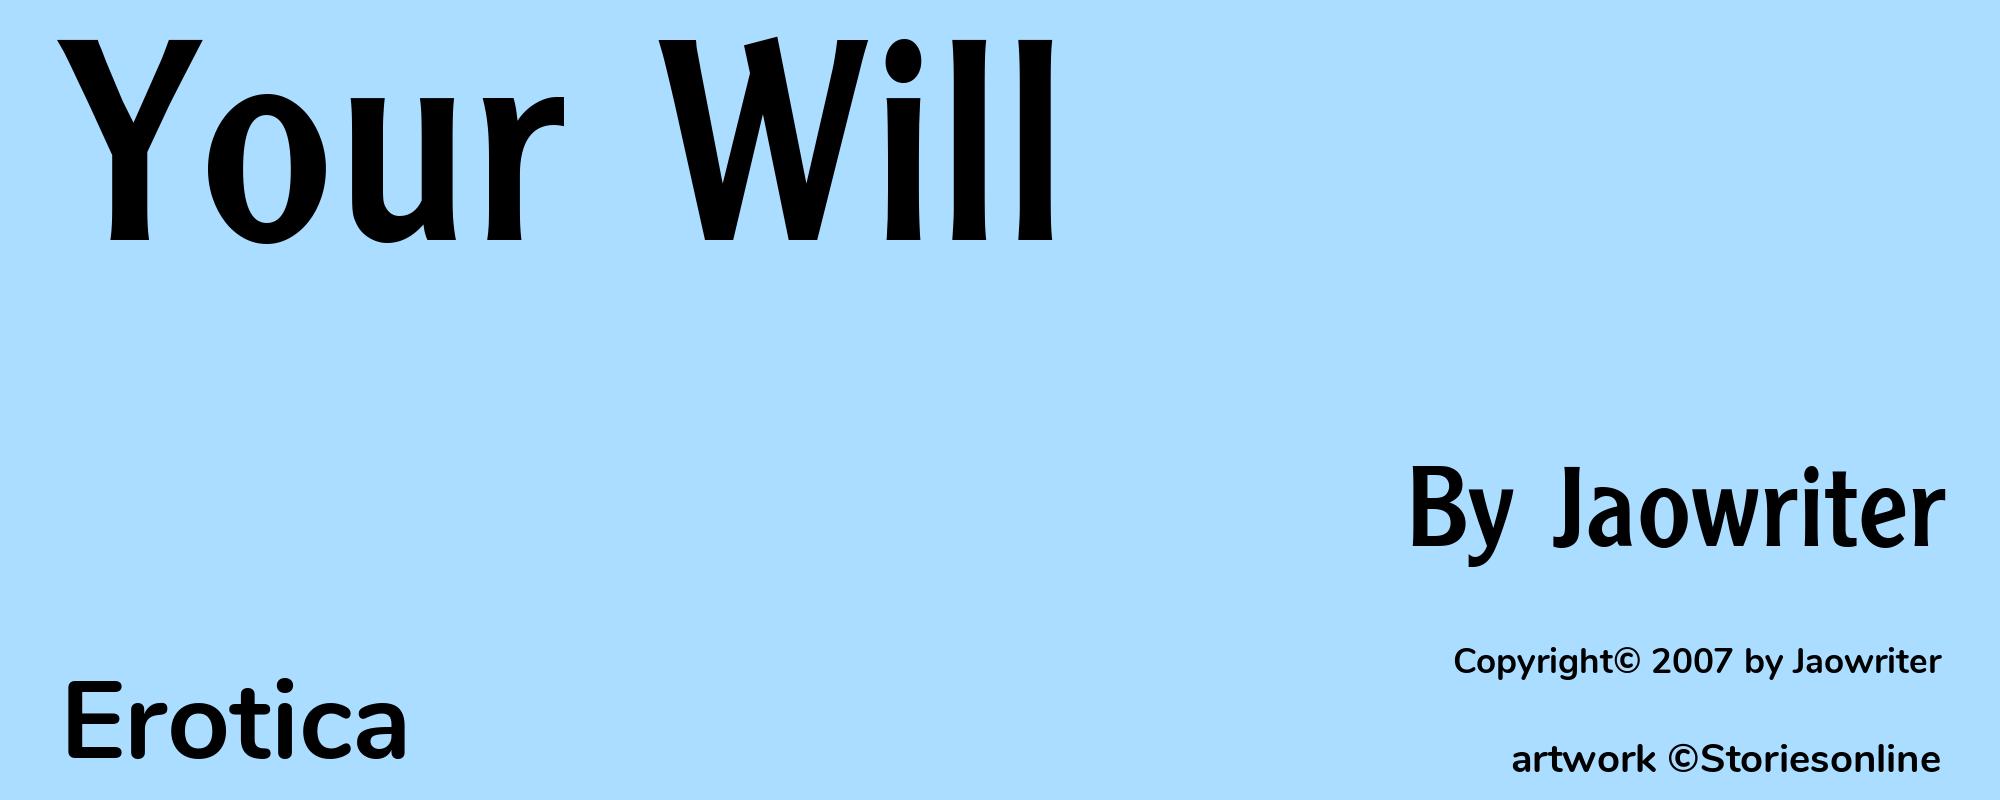 Your Will - Cover